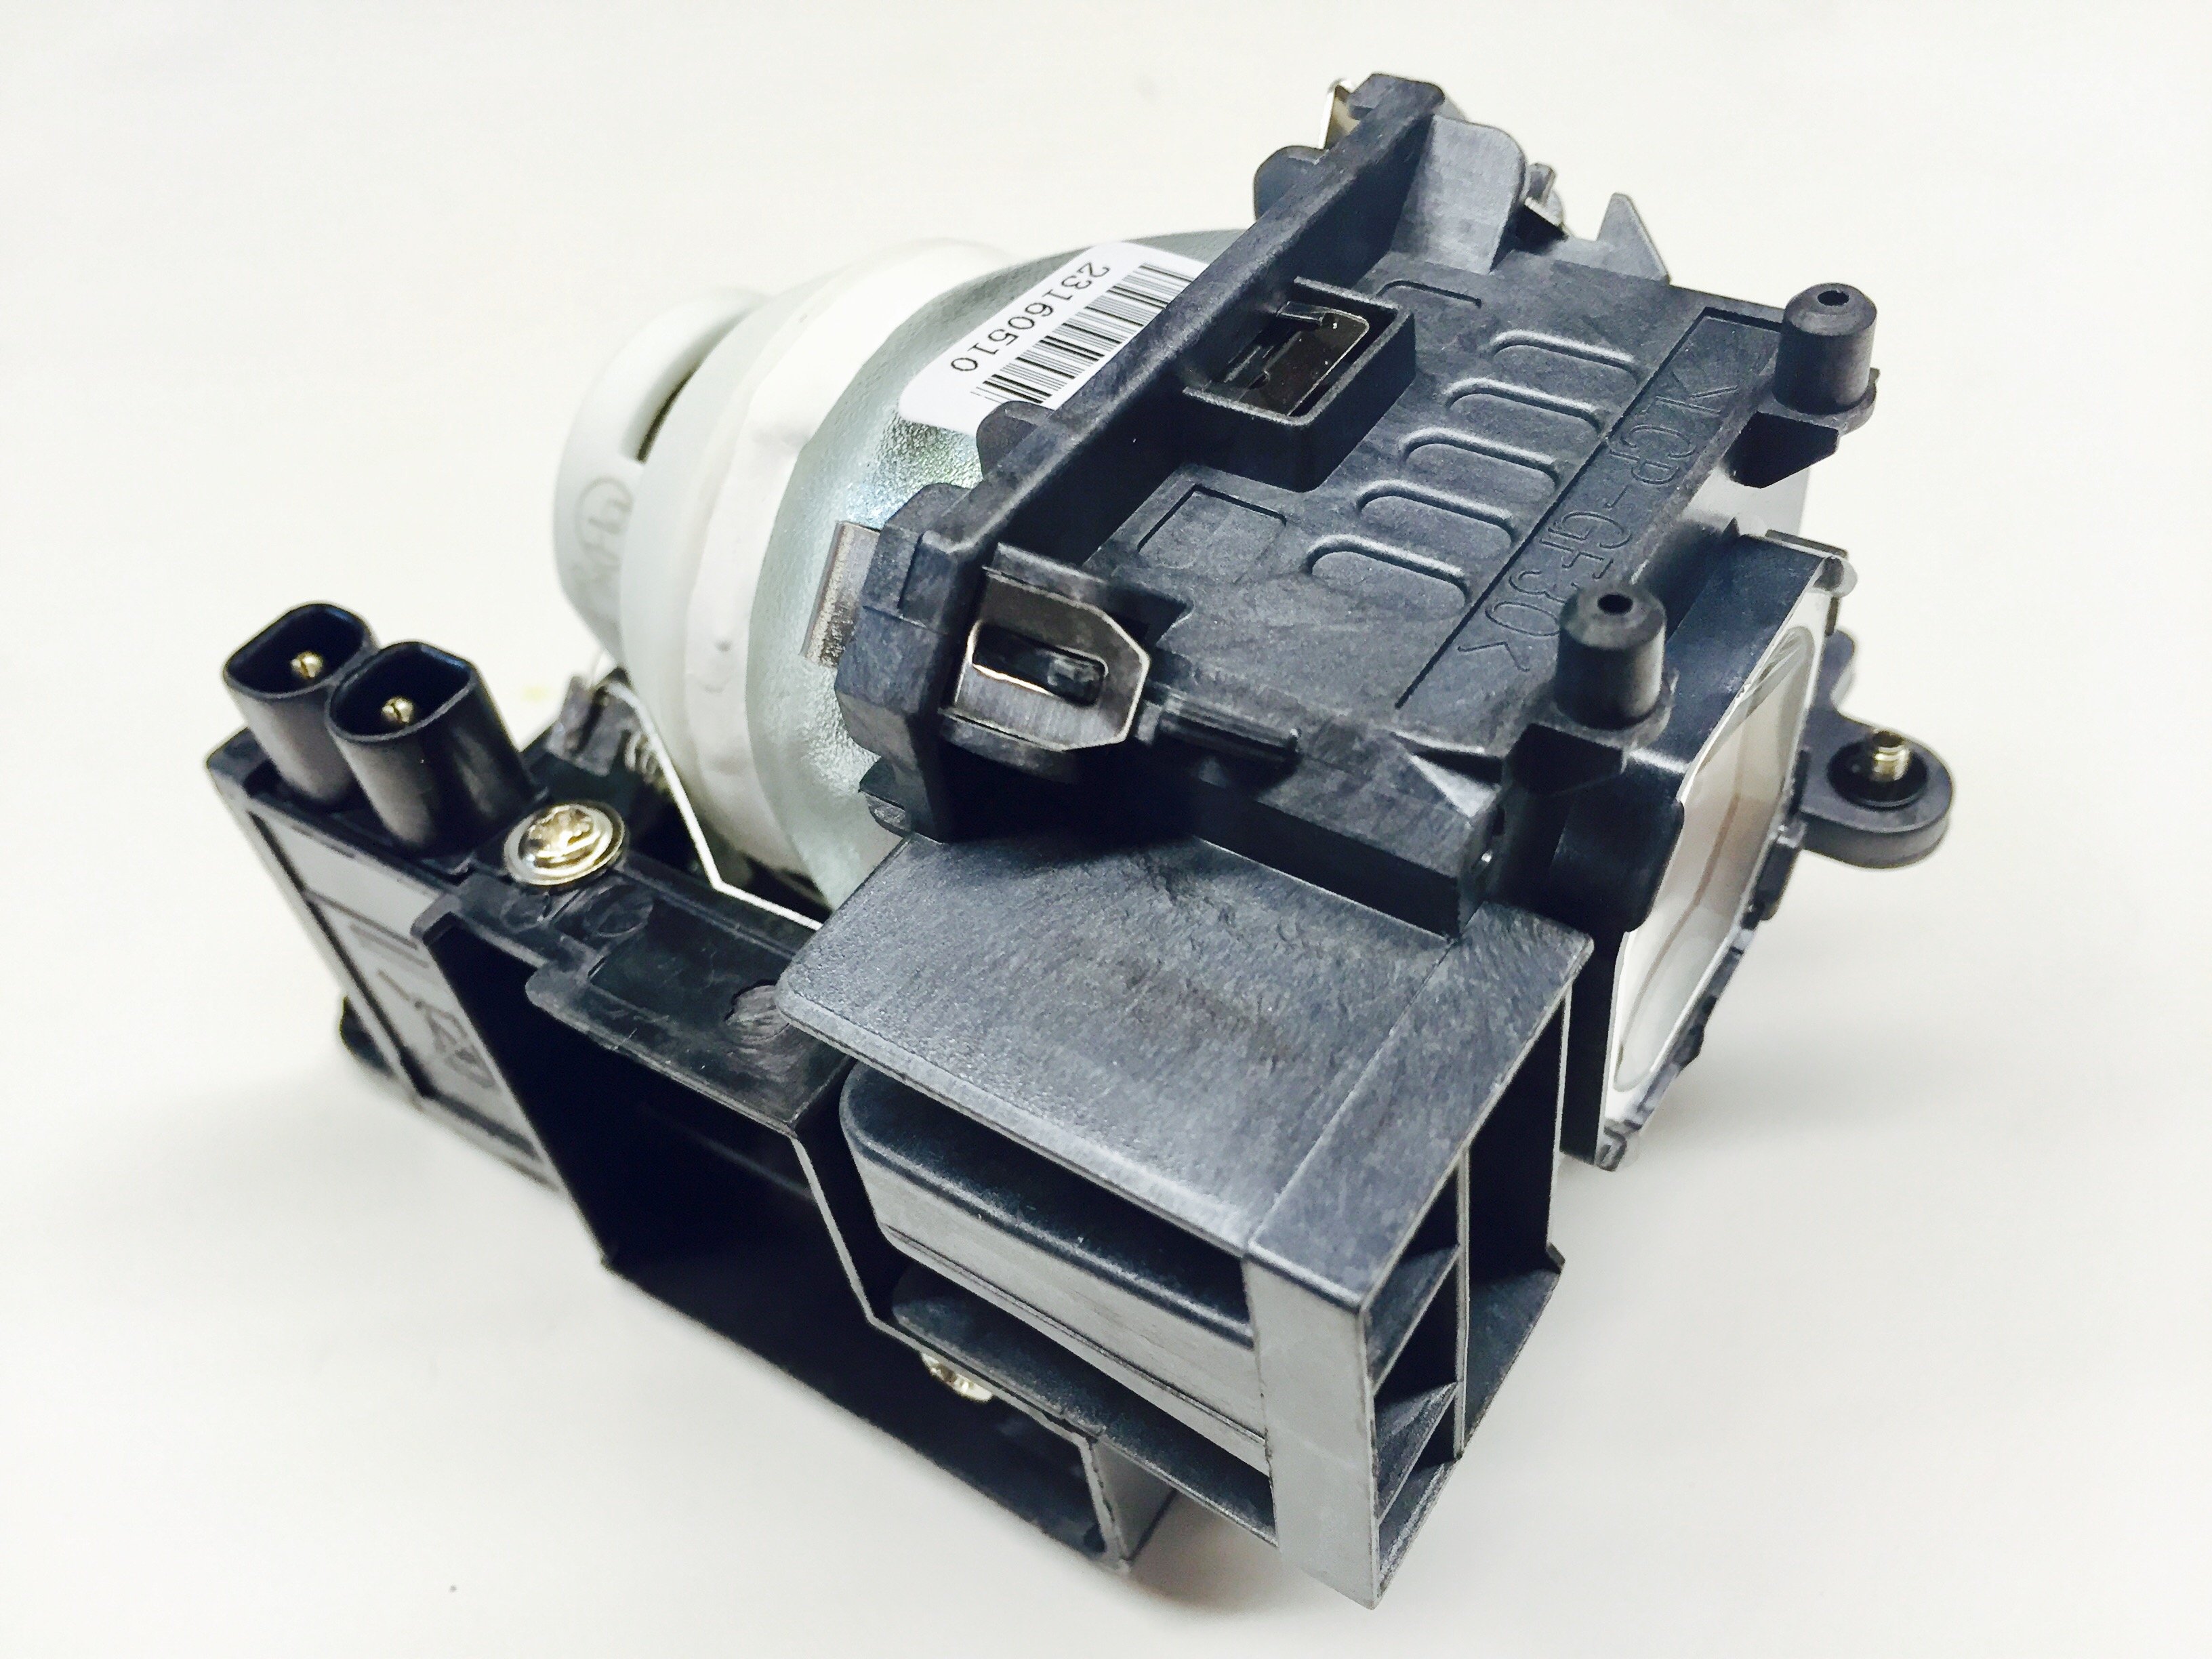 Original Ushio Replacement Lamp & Housing for the NEC UM330Wi Projector - image 1 of 7